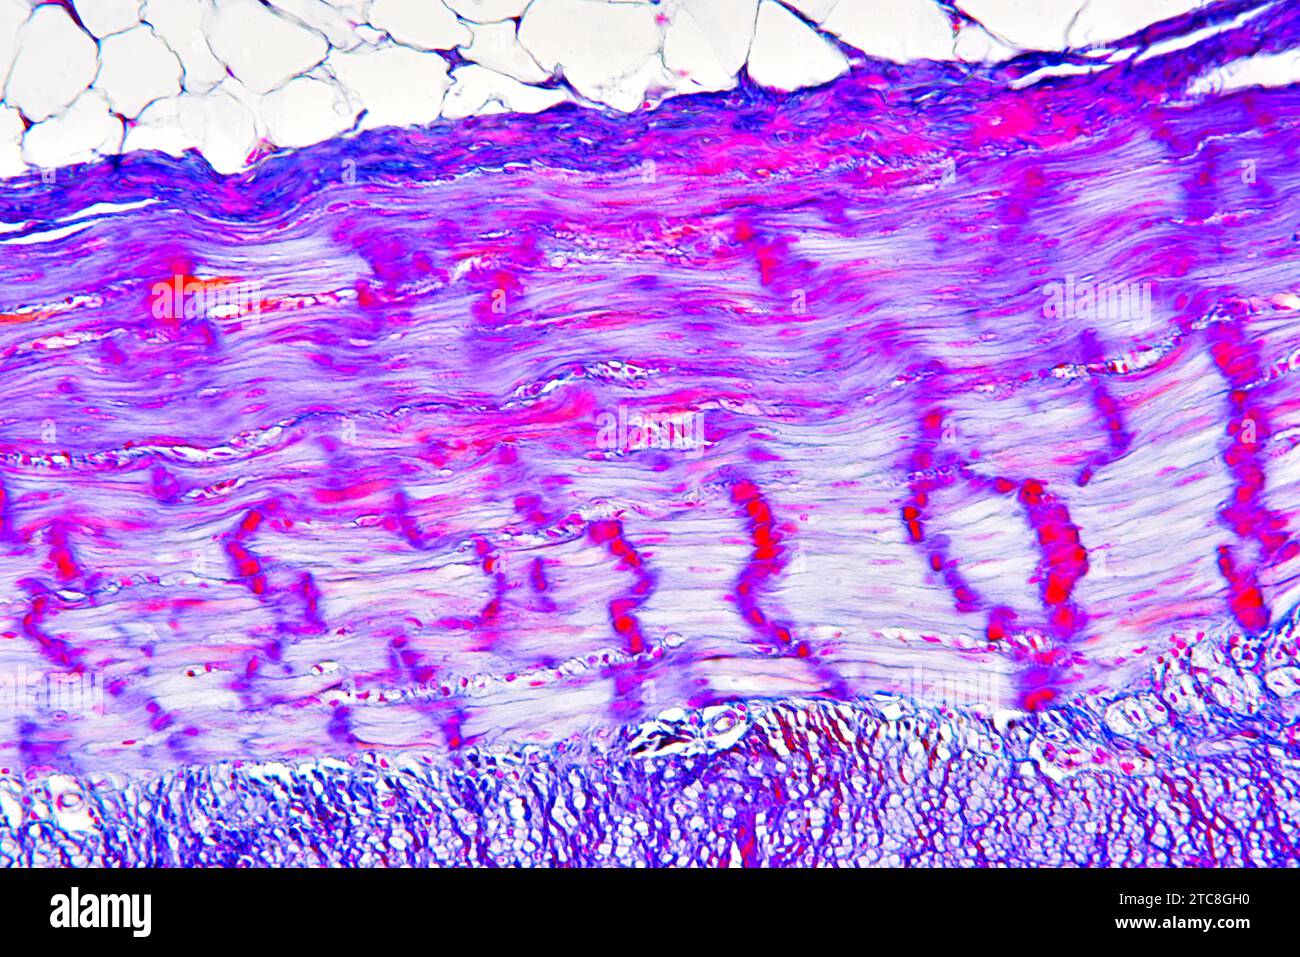 Smooth muscle, adipose and connective tissues of colon. Light microscope X300 at 10 cm wide. Stock Photo